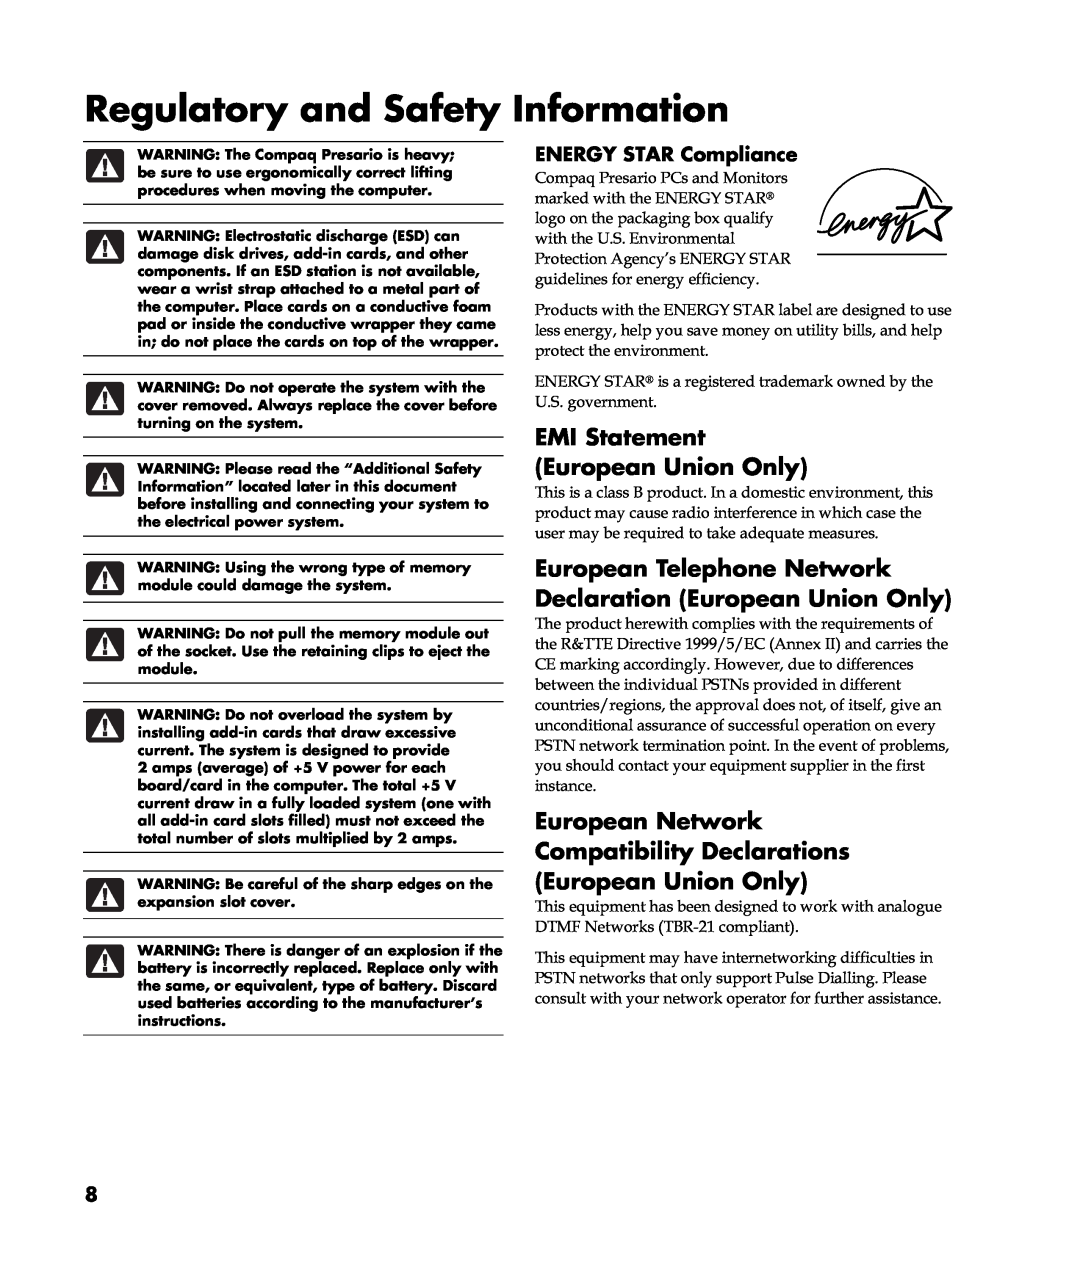 HP S5150UK, S6100UK, S6300UK Regulatory and Safety Information, EMI Statement European Union Only, ENERGY STAR Compliance 